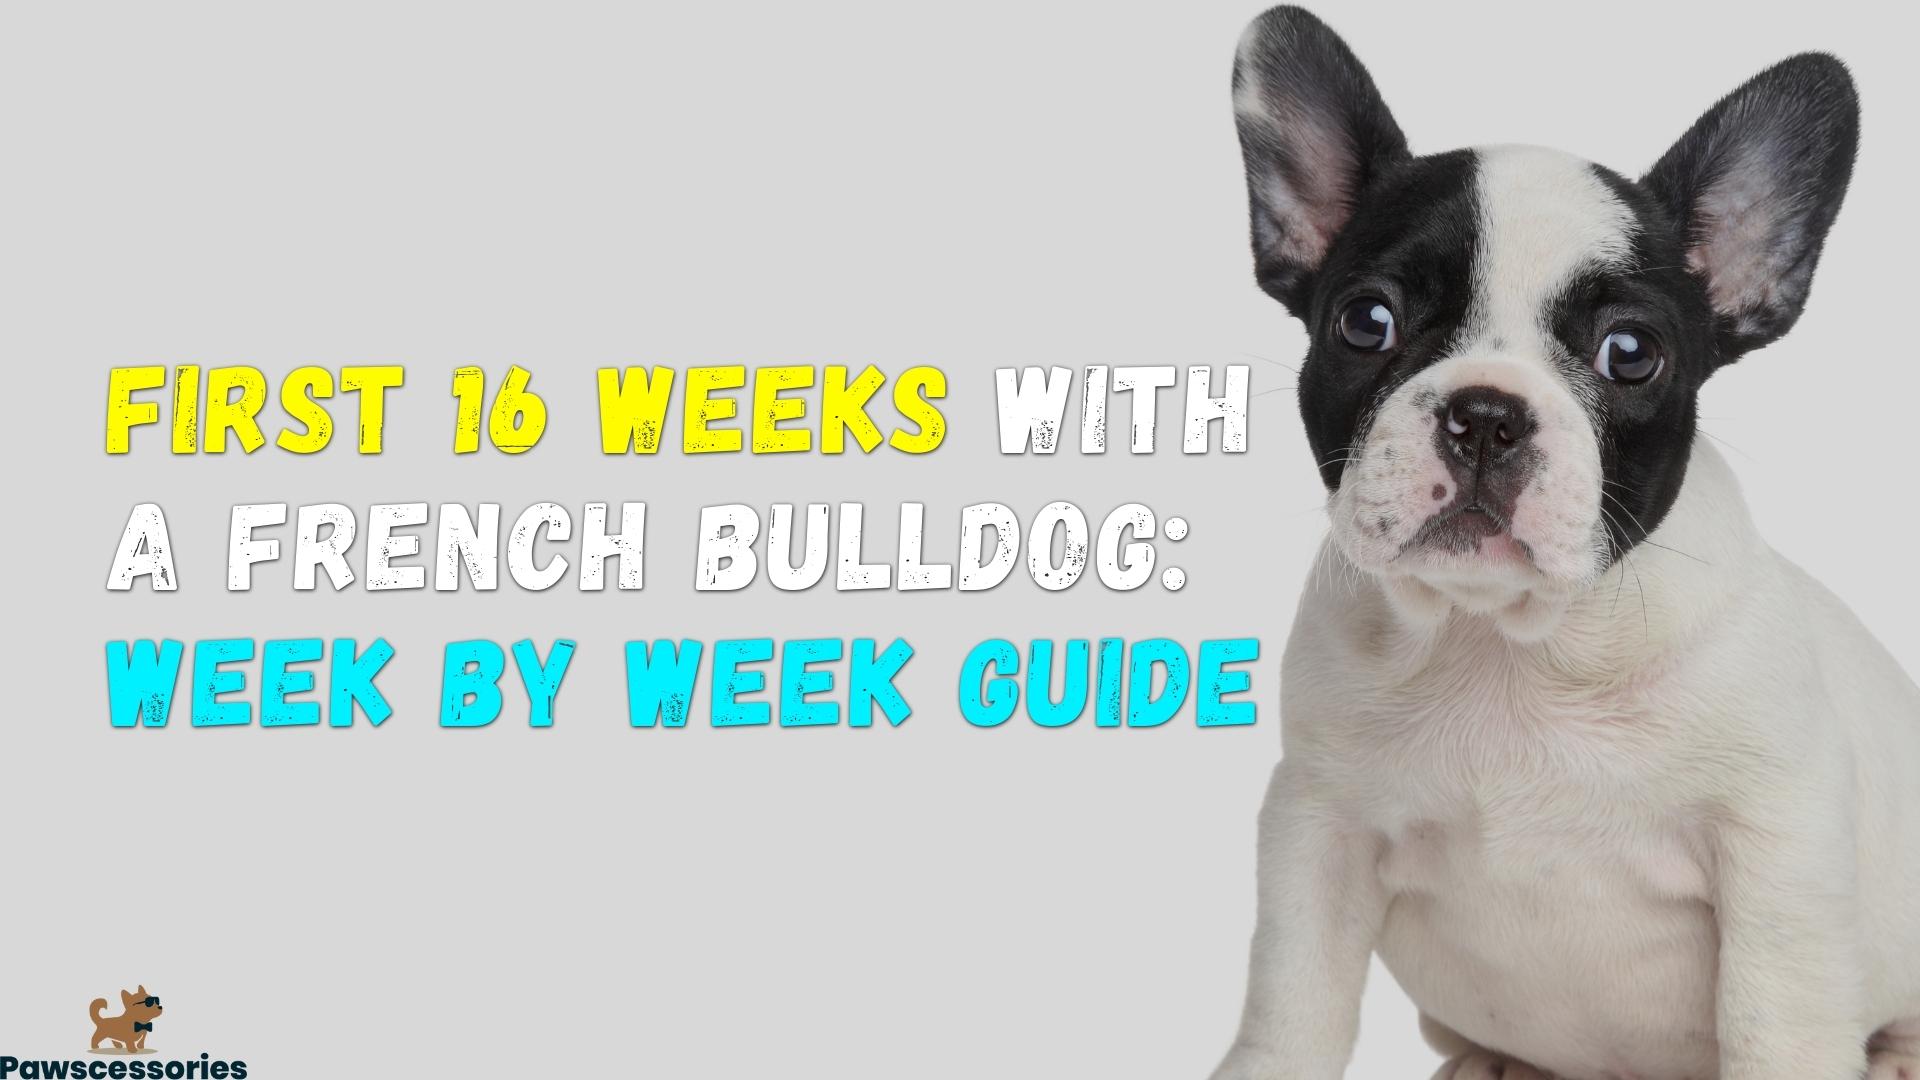 First 16 Weeks With a French Bulldog: Week By Week Guide